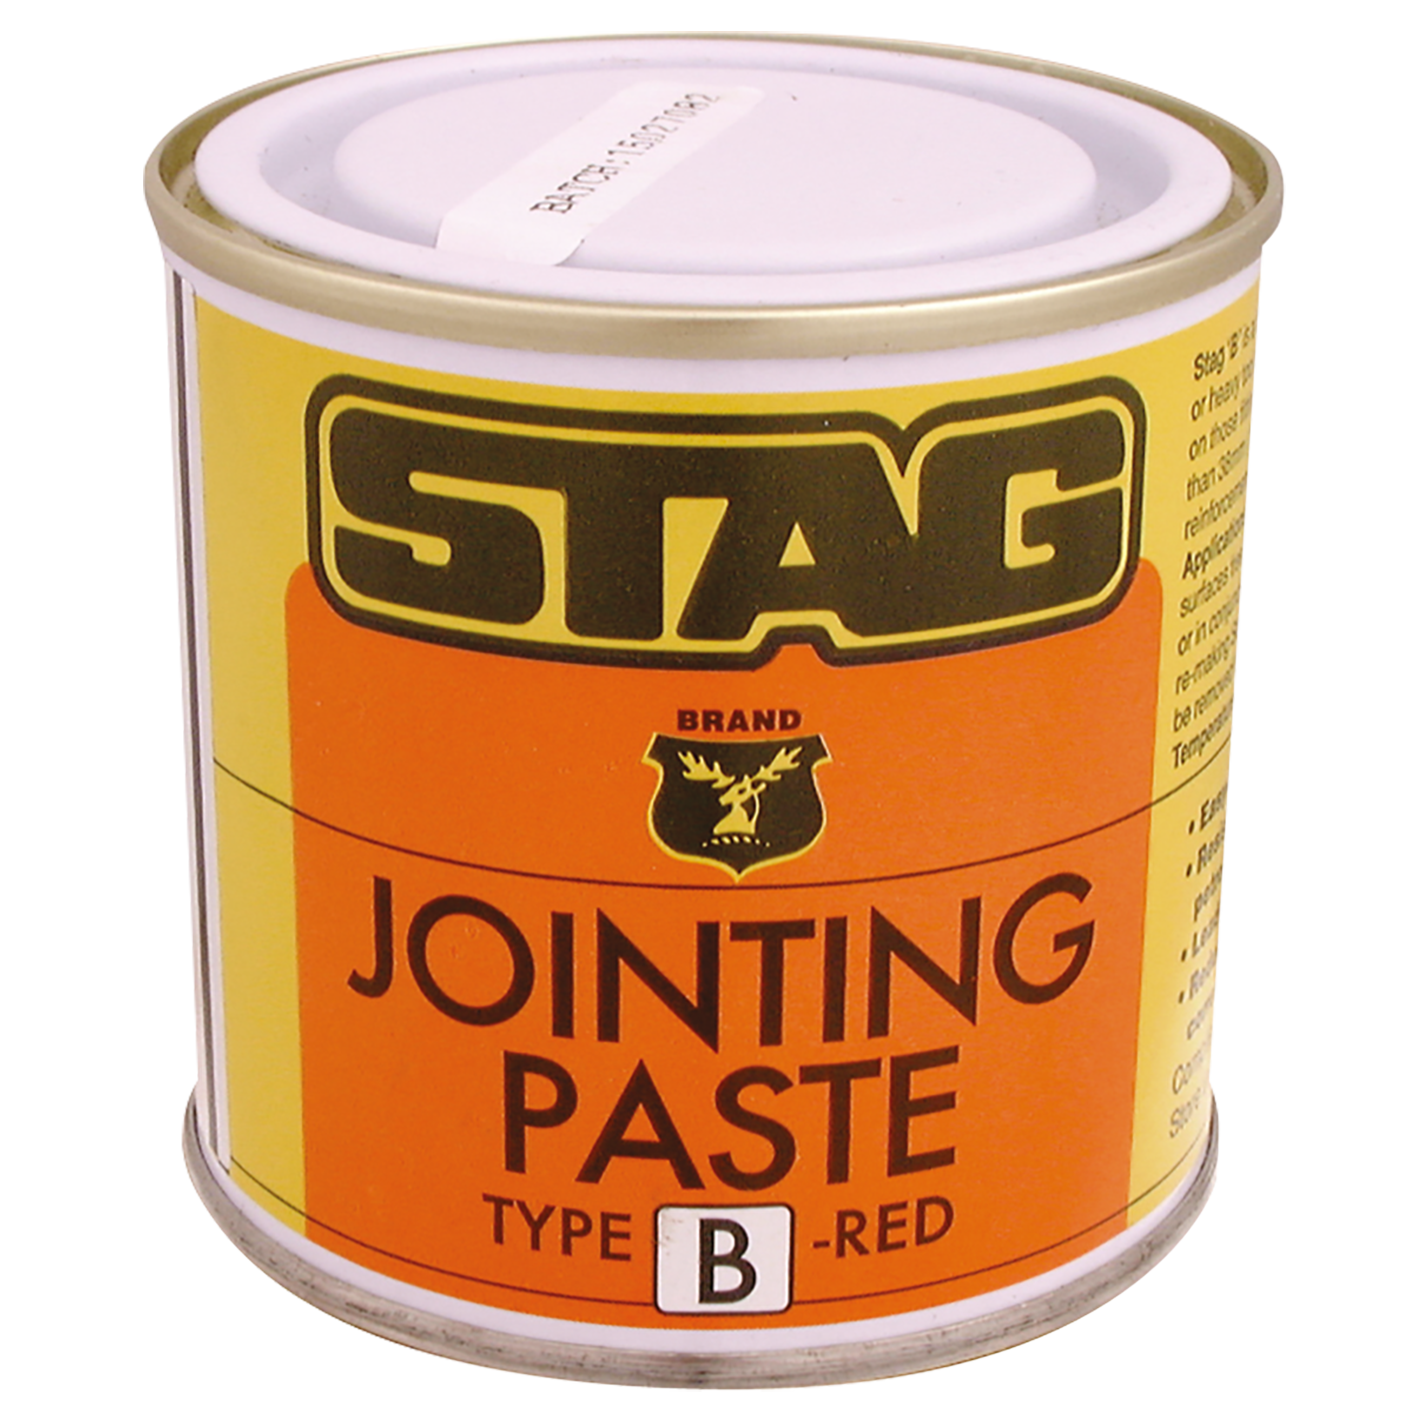 STAG B JOINTING PASTE 500GRM TIN